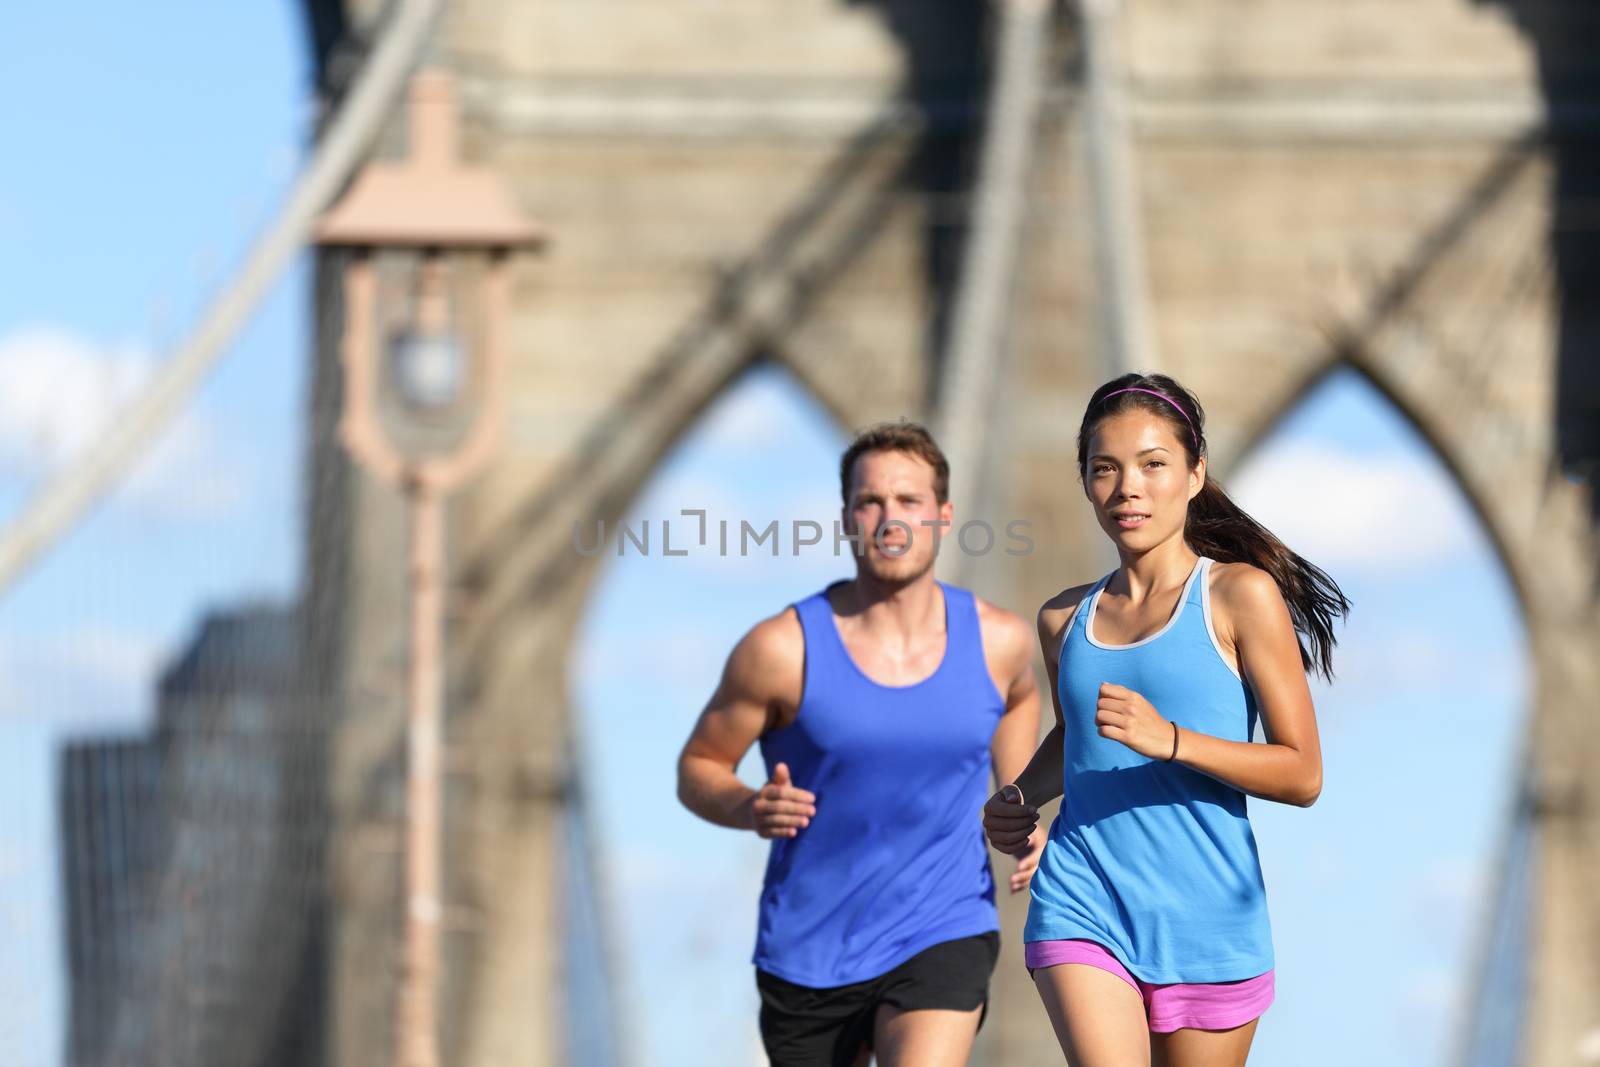 New York city runners running training for marathon on Brooklyn bridge NYC in urban cityscape. Fit young couple doing their workout routine on a summer day.